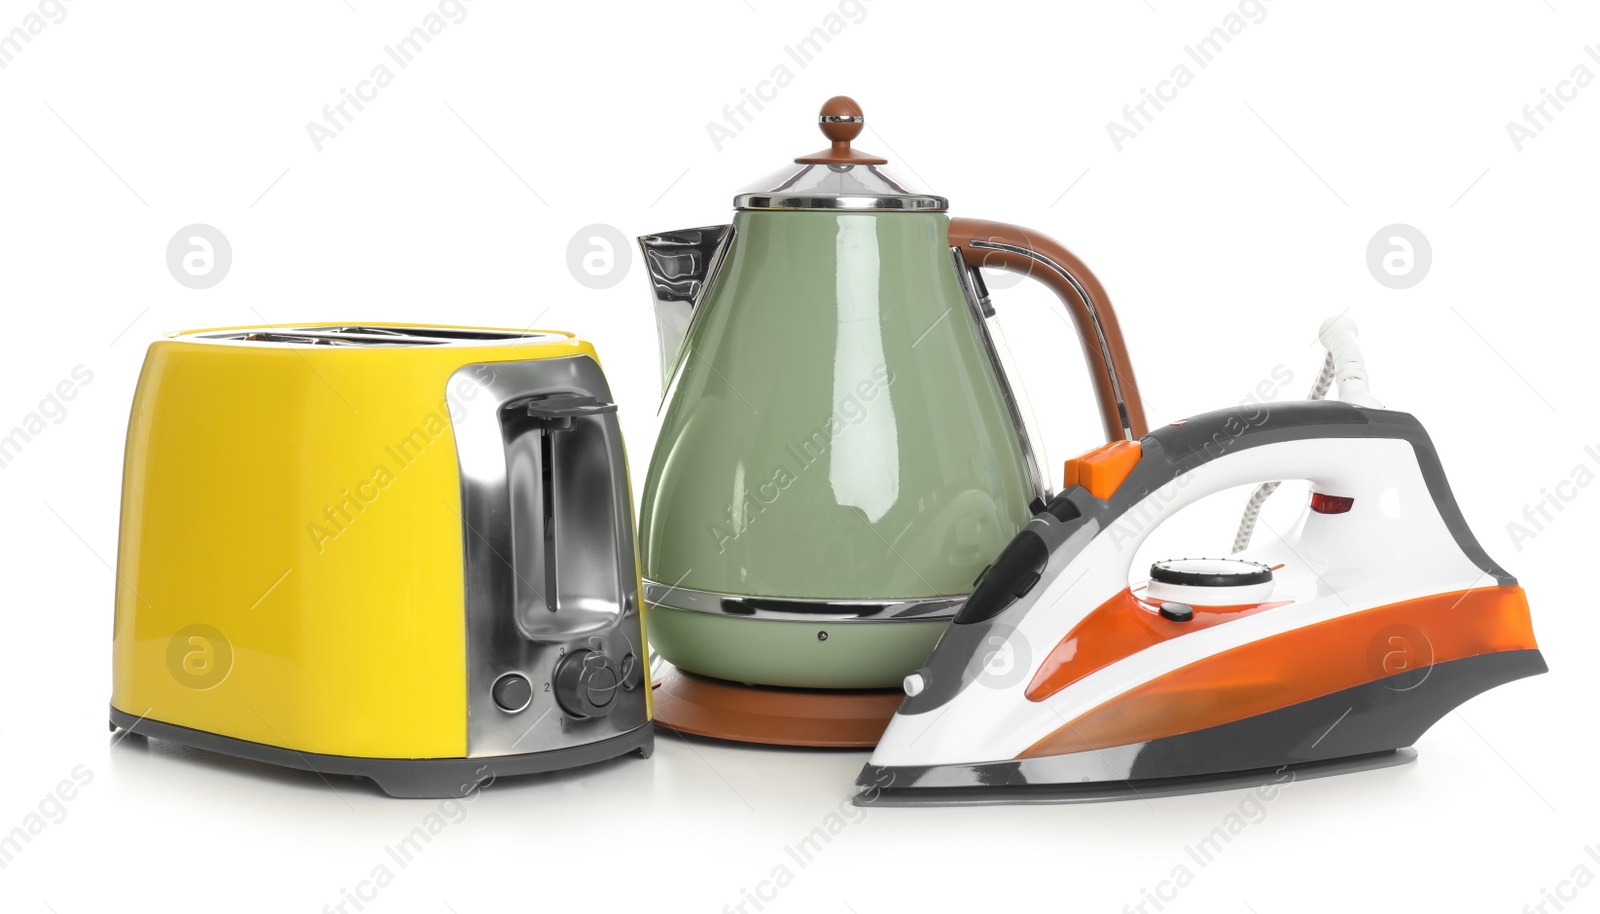 Photo of Set of modern home appliances isolated on white